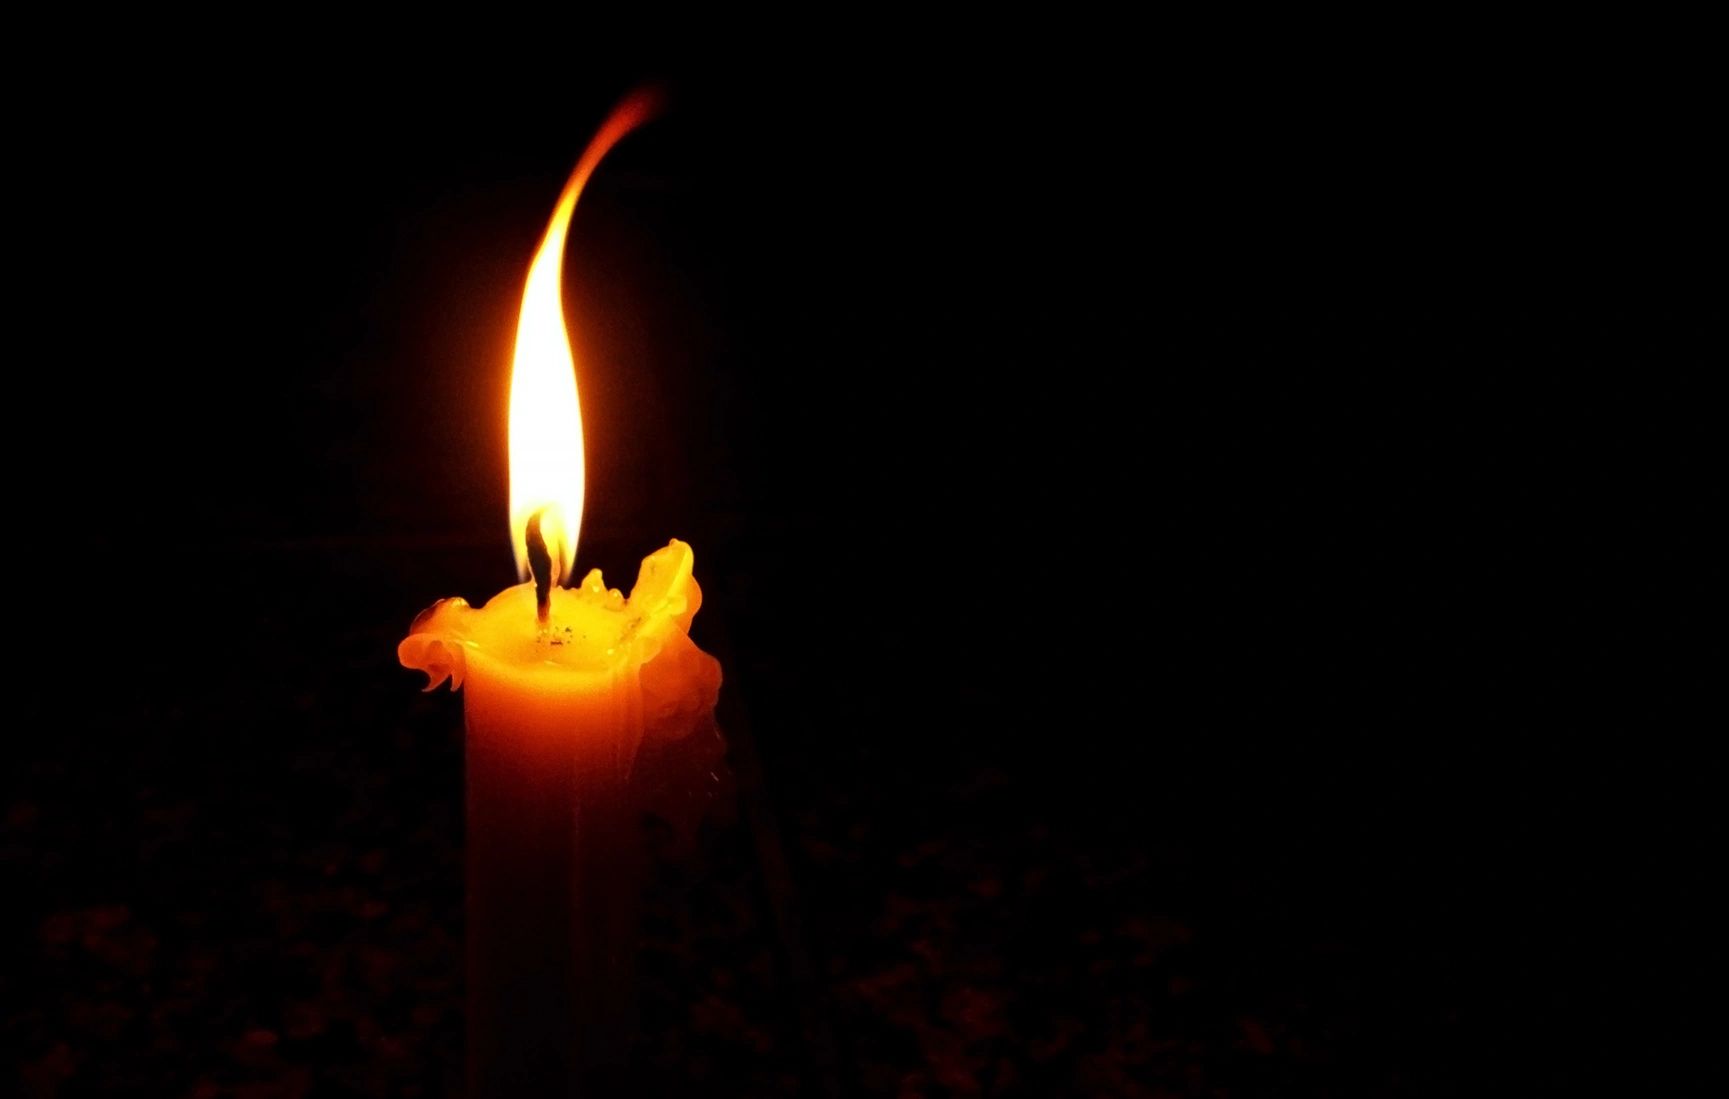 A Candle Lighting In The Dark